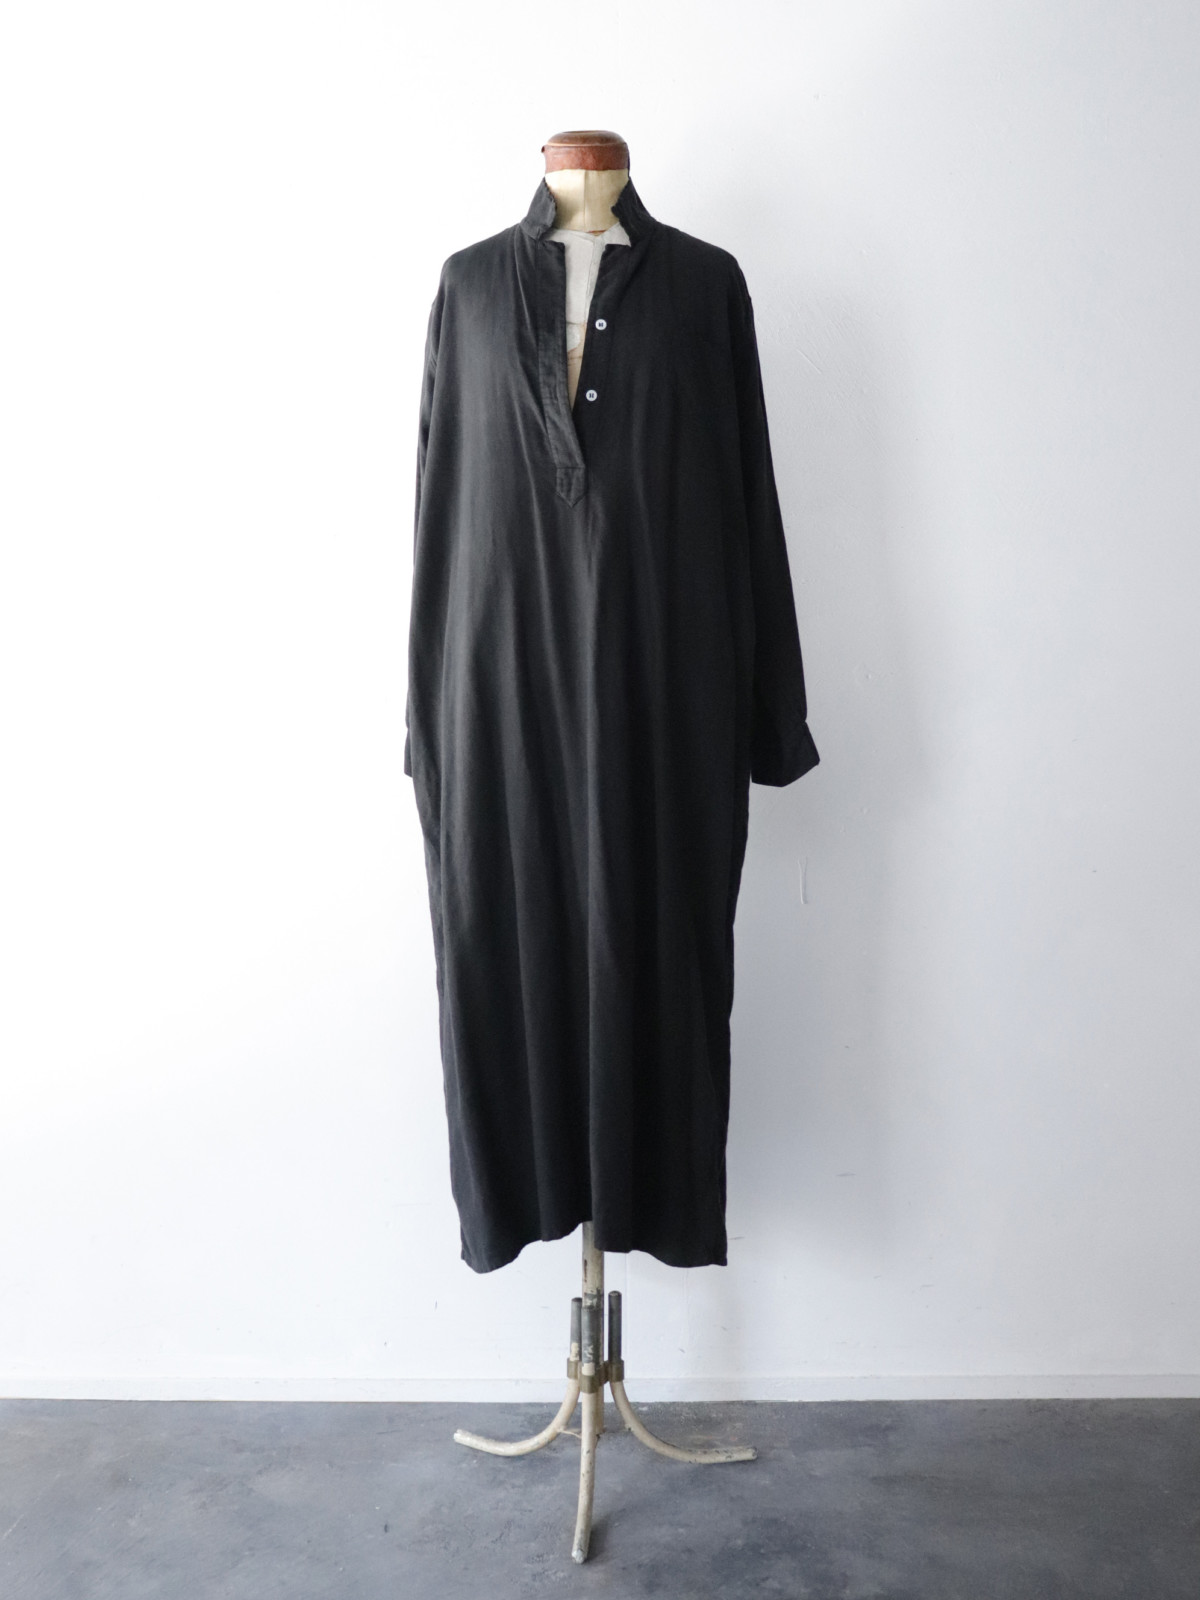 Black-dyed,one-piece,europe